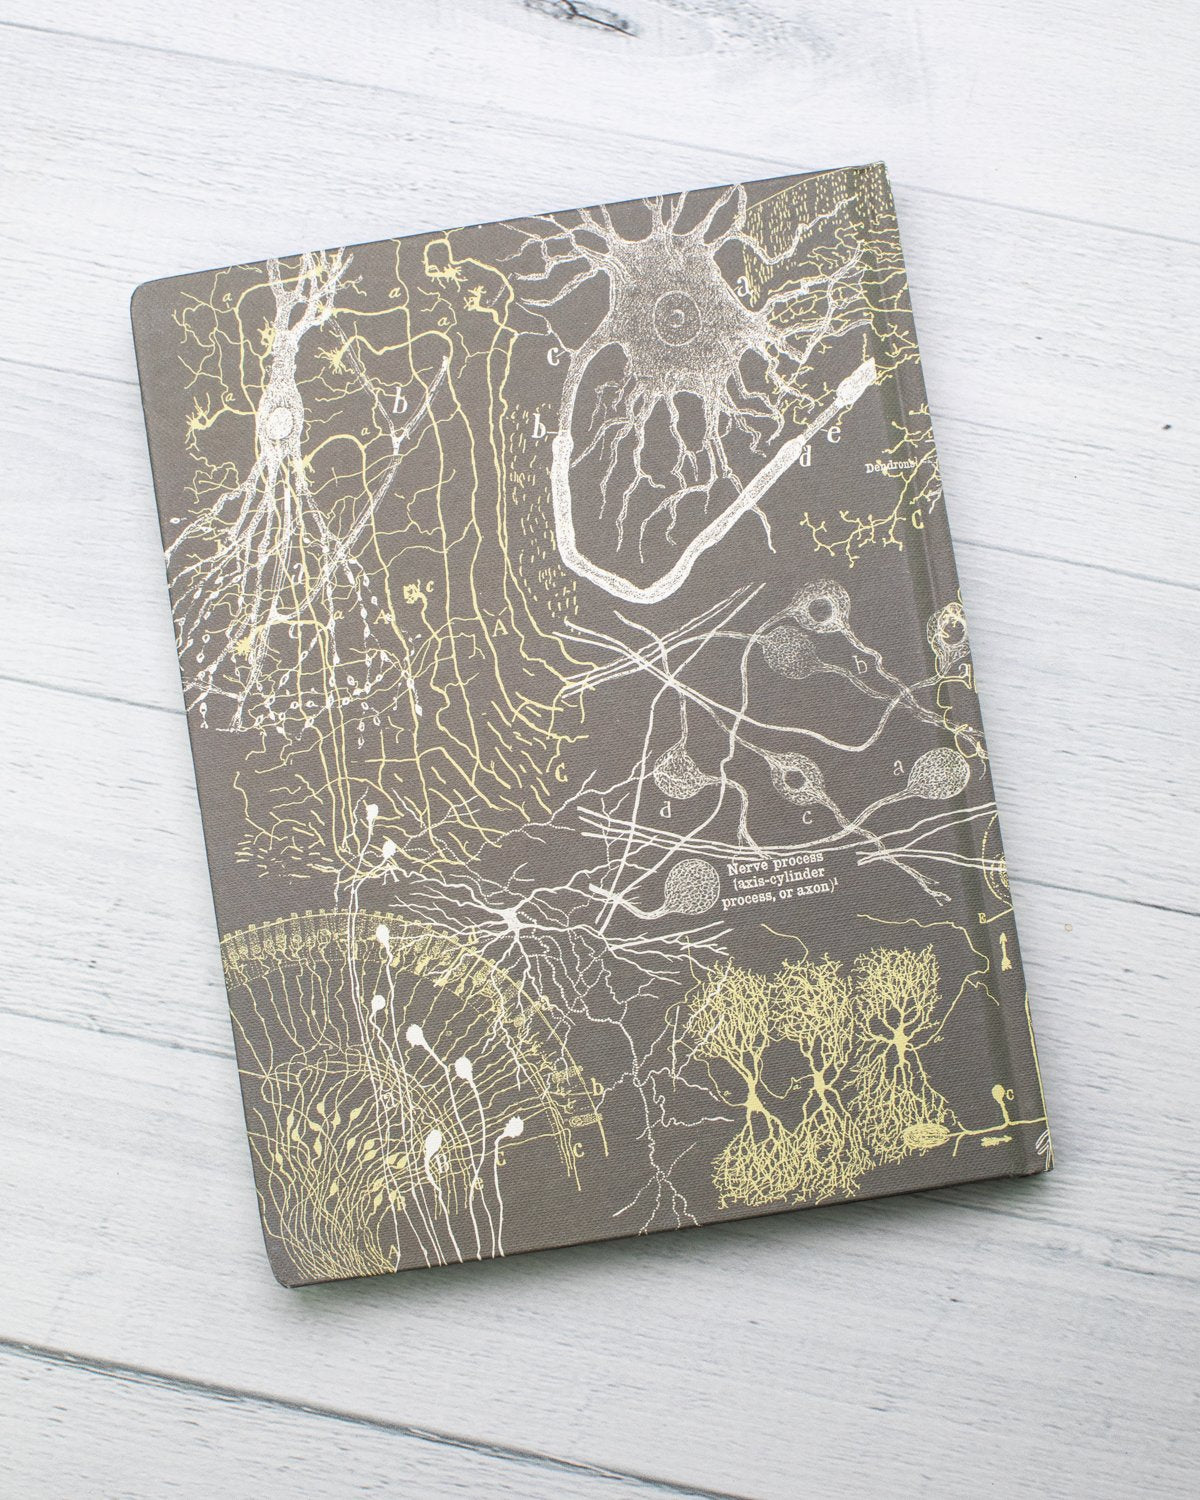 Neurons Hardcover Notebook - Lined/Grid